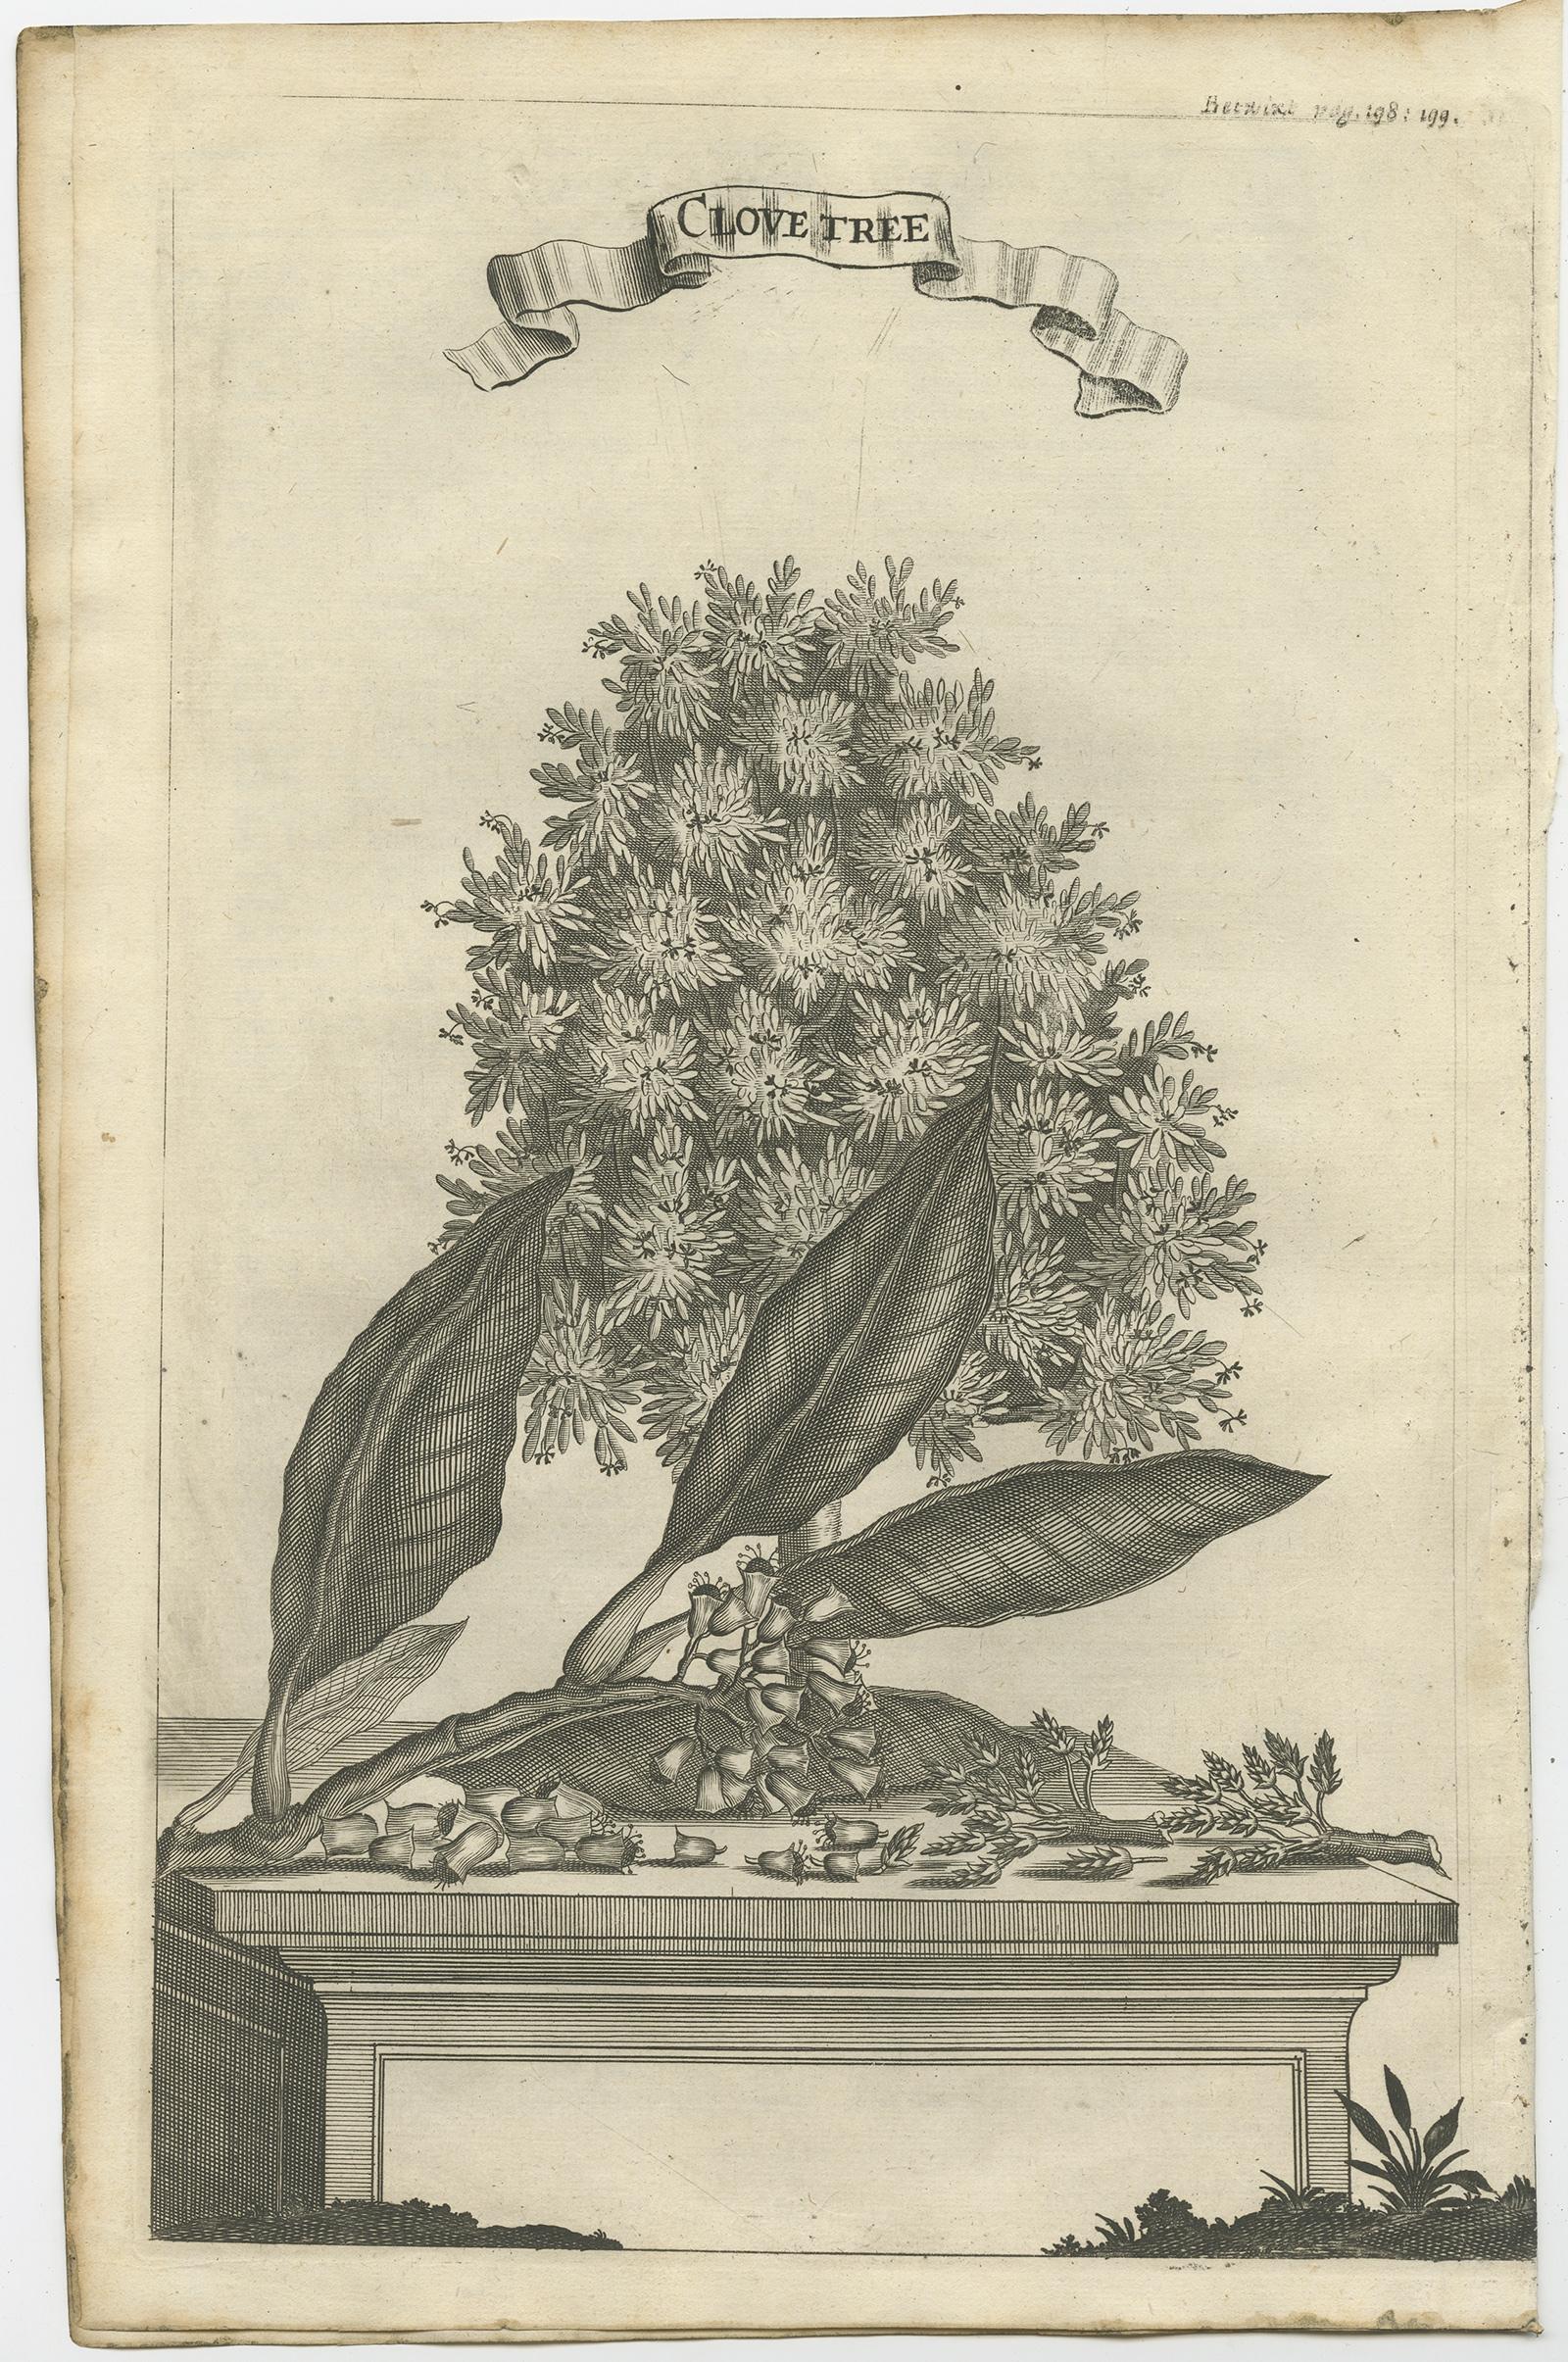 Antique print titled 'Clove Tree'. 

Copper engraving of a clove tree. This print originates from 'Voyages and Travels to the East-Indies' by J. Nieuhof. 

Artists and engravers: Johan / Jan / Johannes Nieuhof / Nieuhoff / Neuhof (1618-1672) was